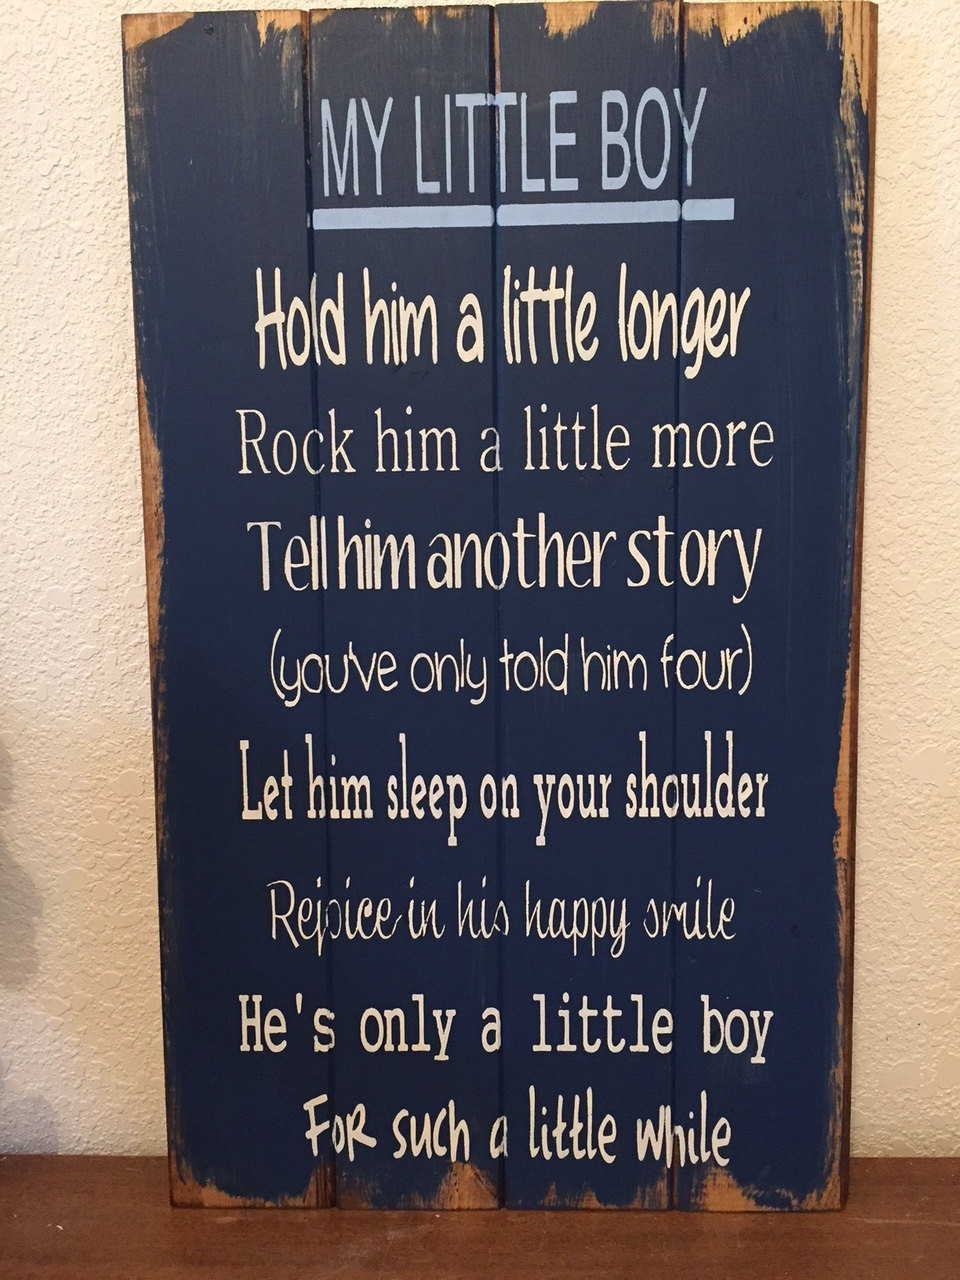 Inspirational Quotes For Boys
 Wood signpalletquoteswall arthome decorlittle boyboys